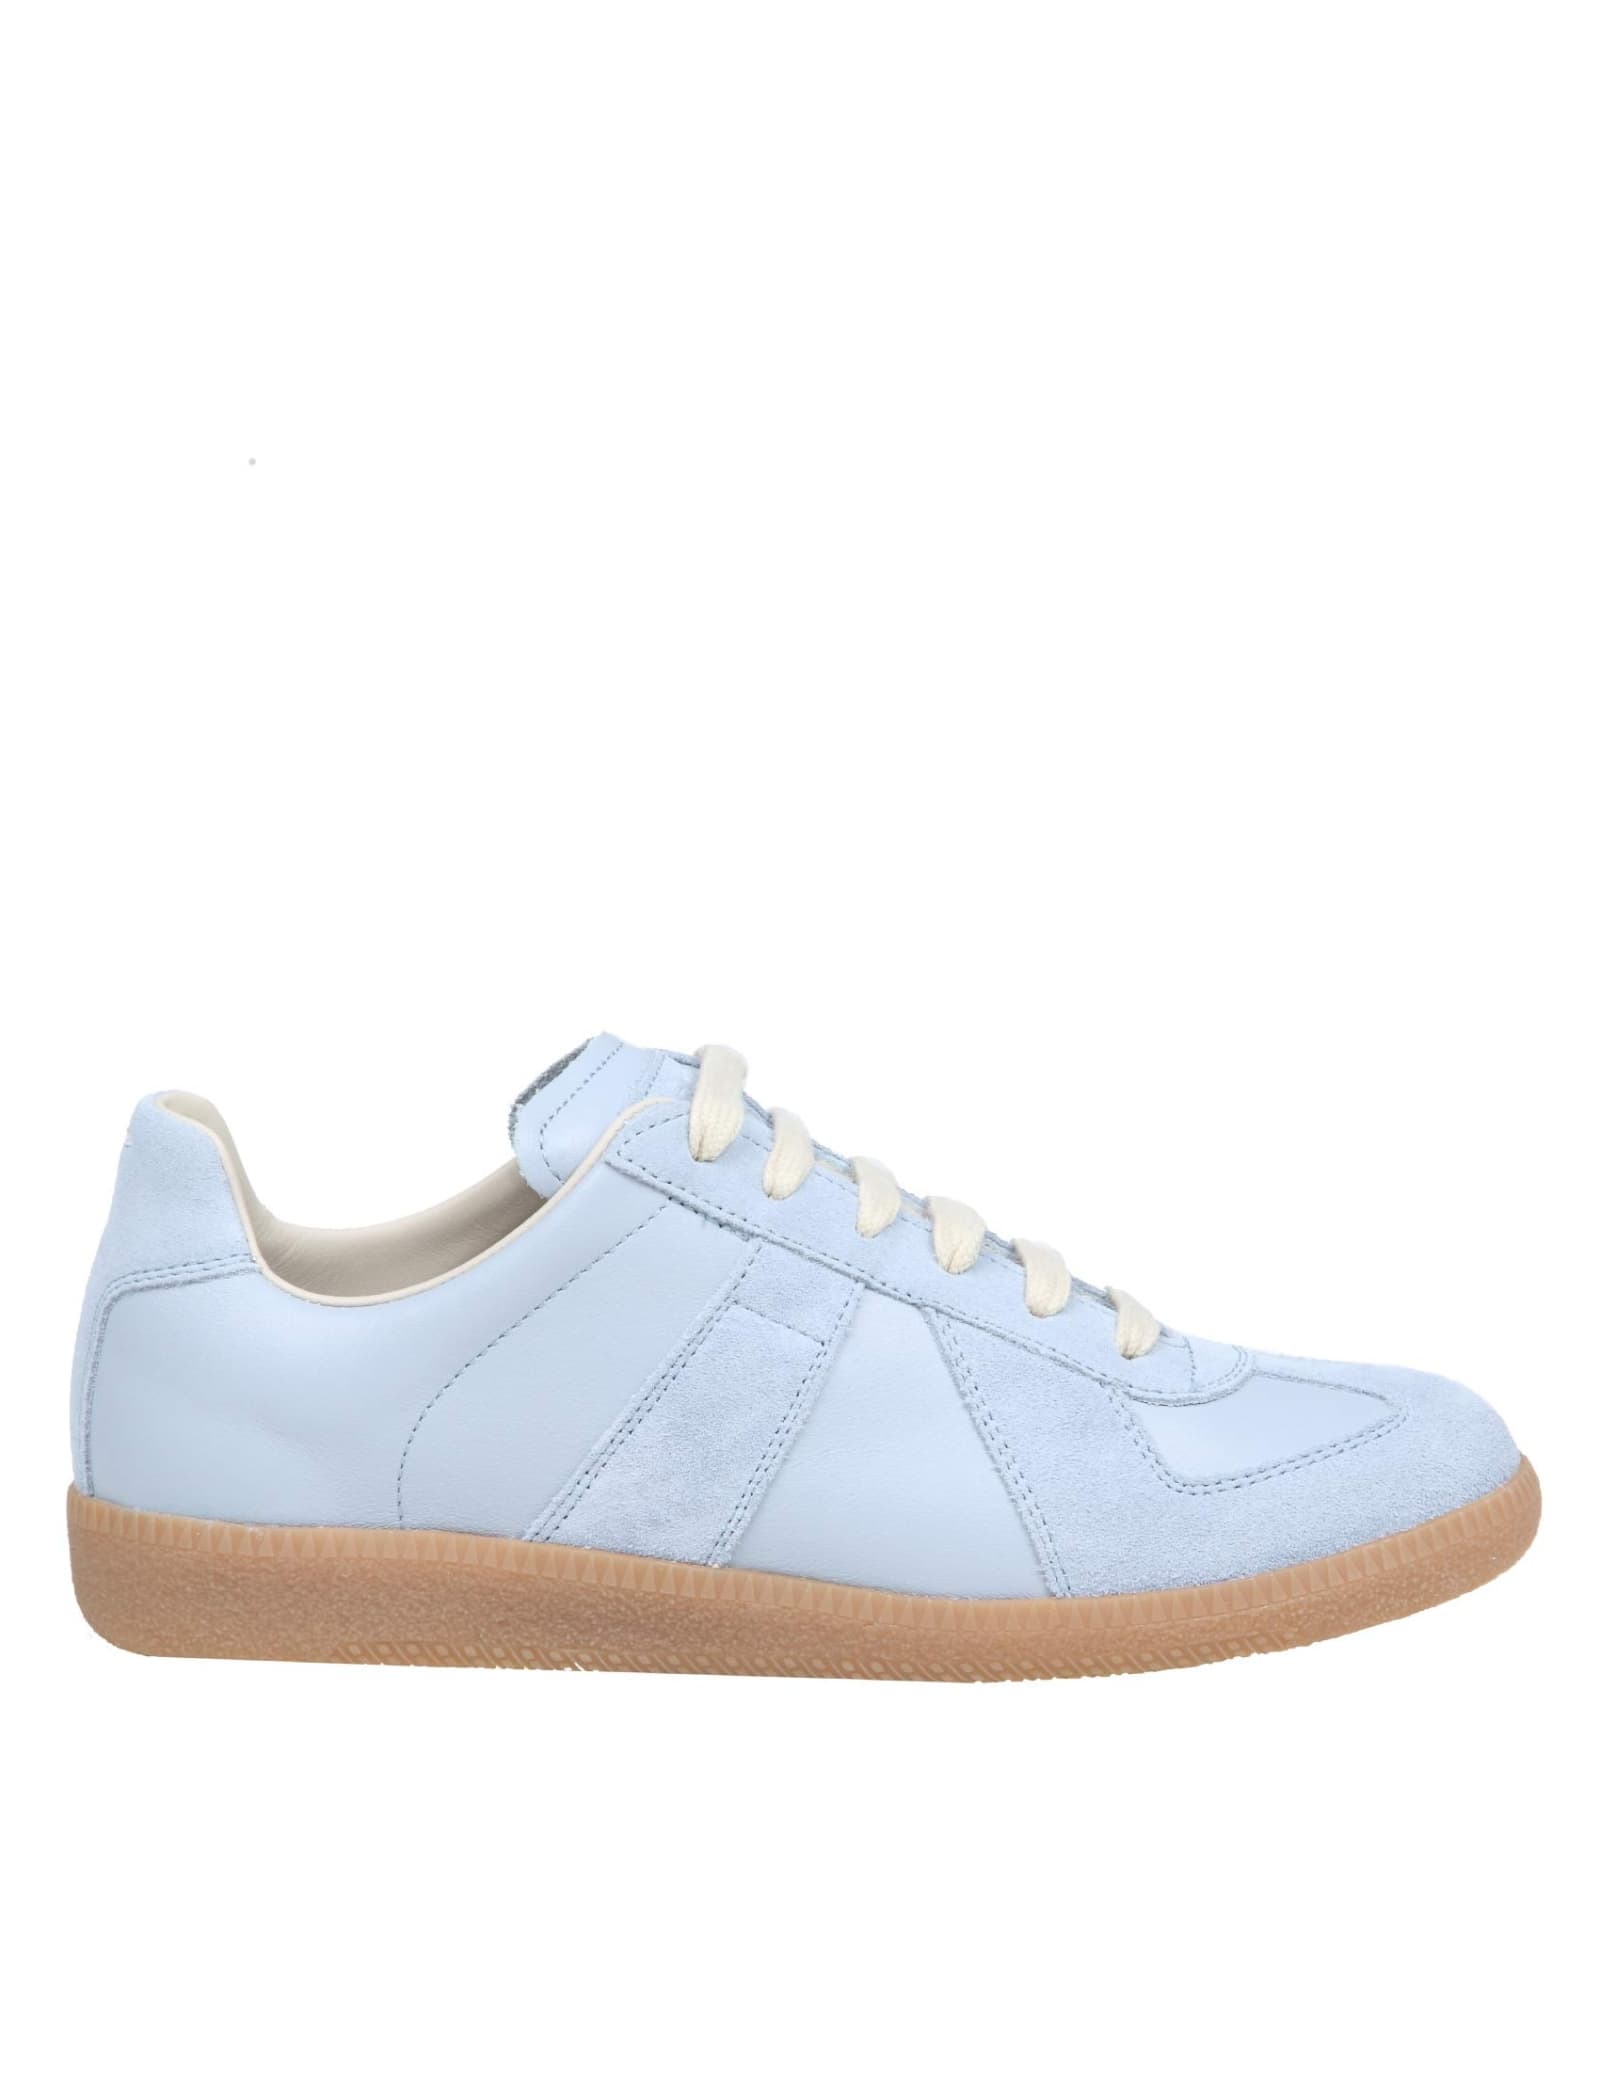 Maison Margiela Replica Sneakers In Leather And Suede